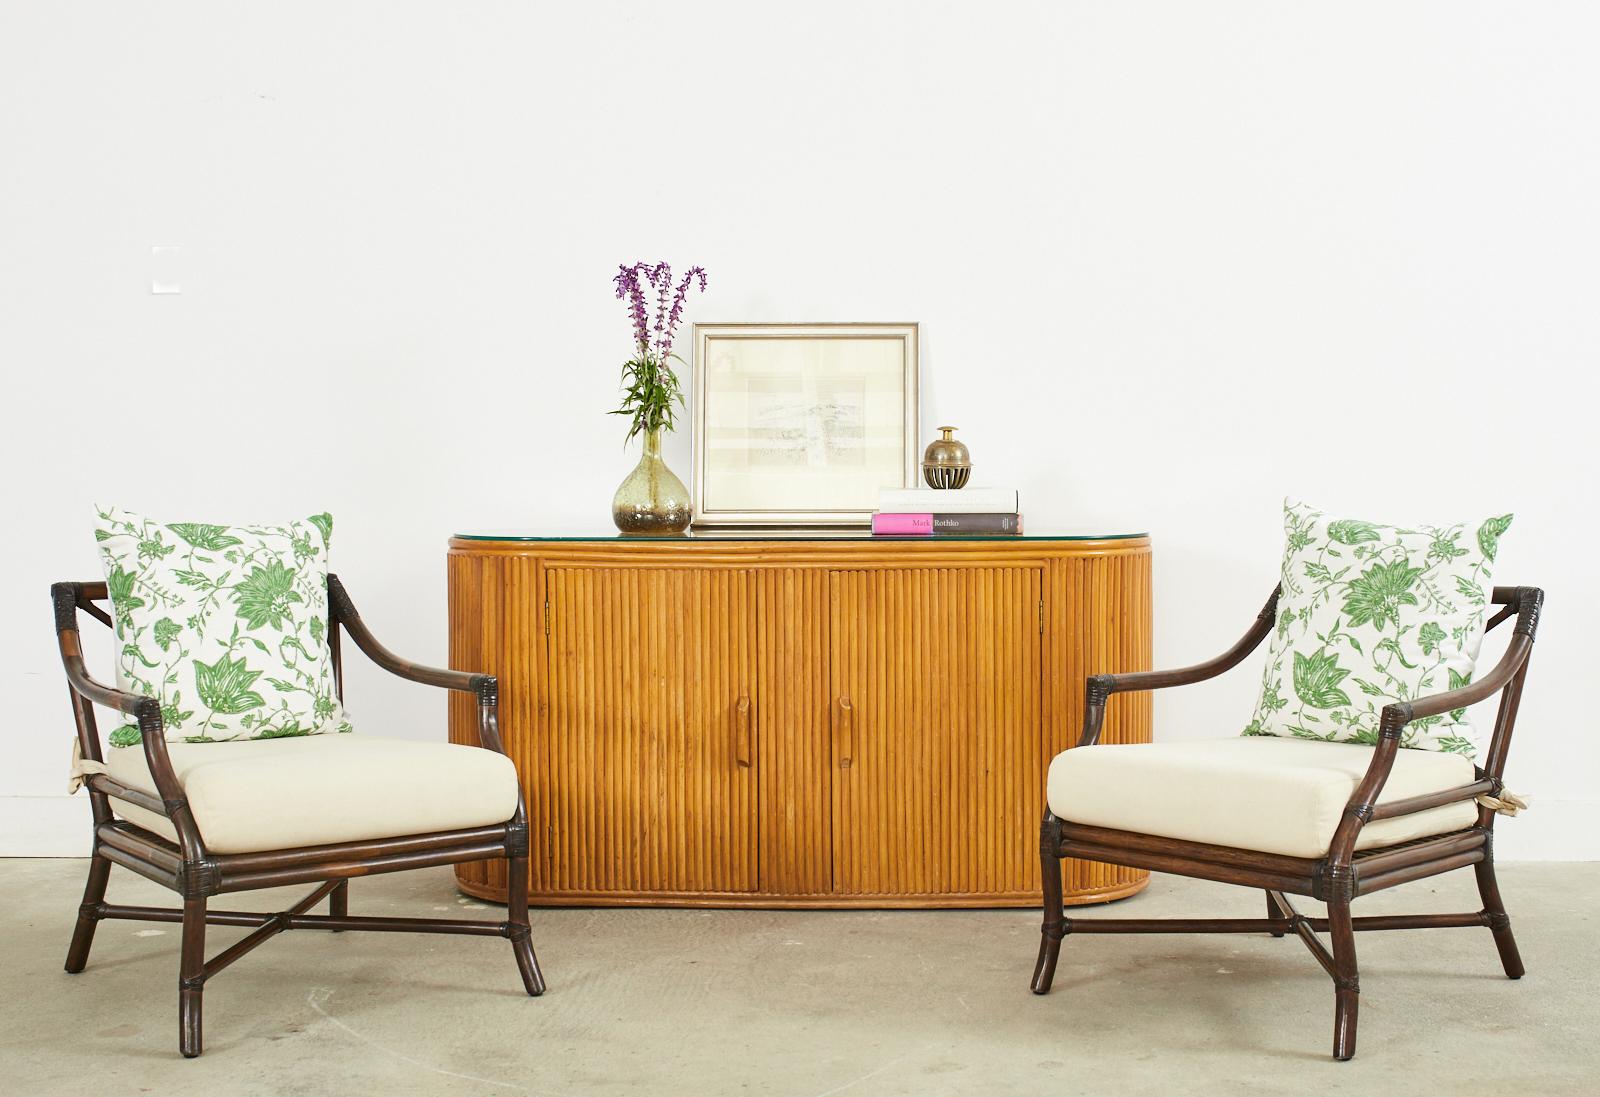 Handsome sideboard credenza that represents everything wonderful about the modern use of rattan. Incredible geometric patterns reminiscent of art deco with modern shapes and lines. While touching modernism the rattan keeps the piece grounded in